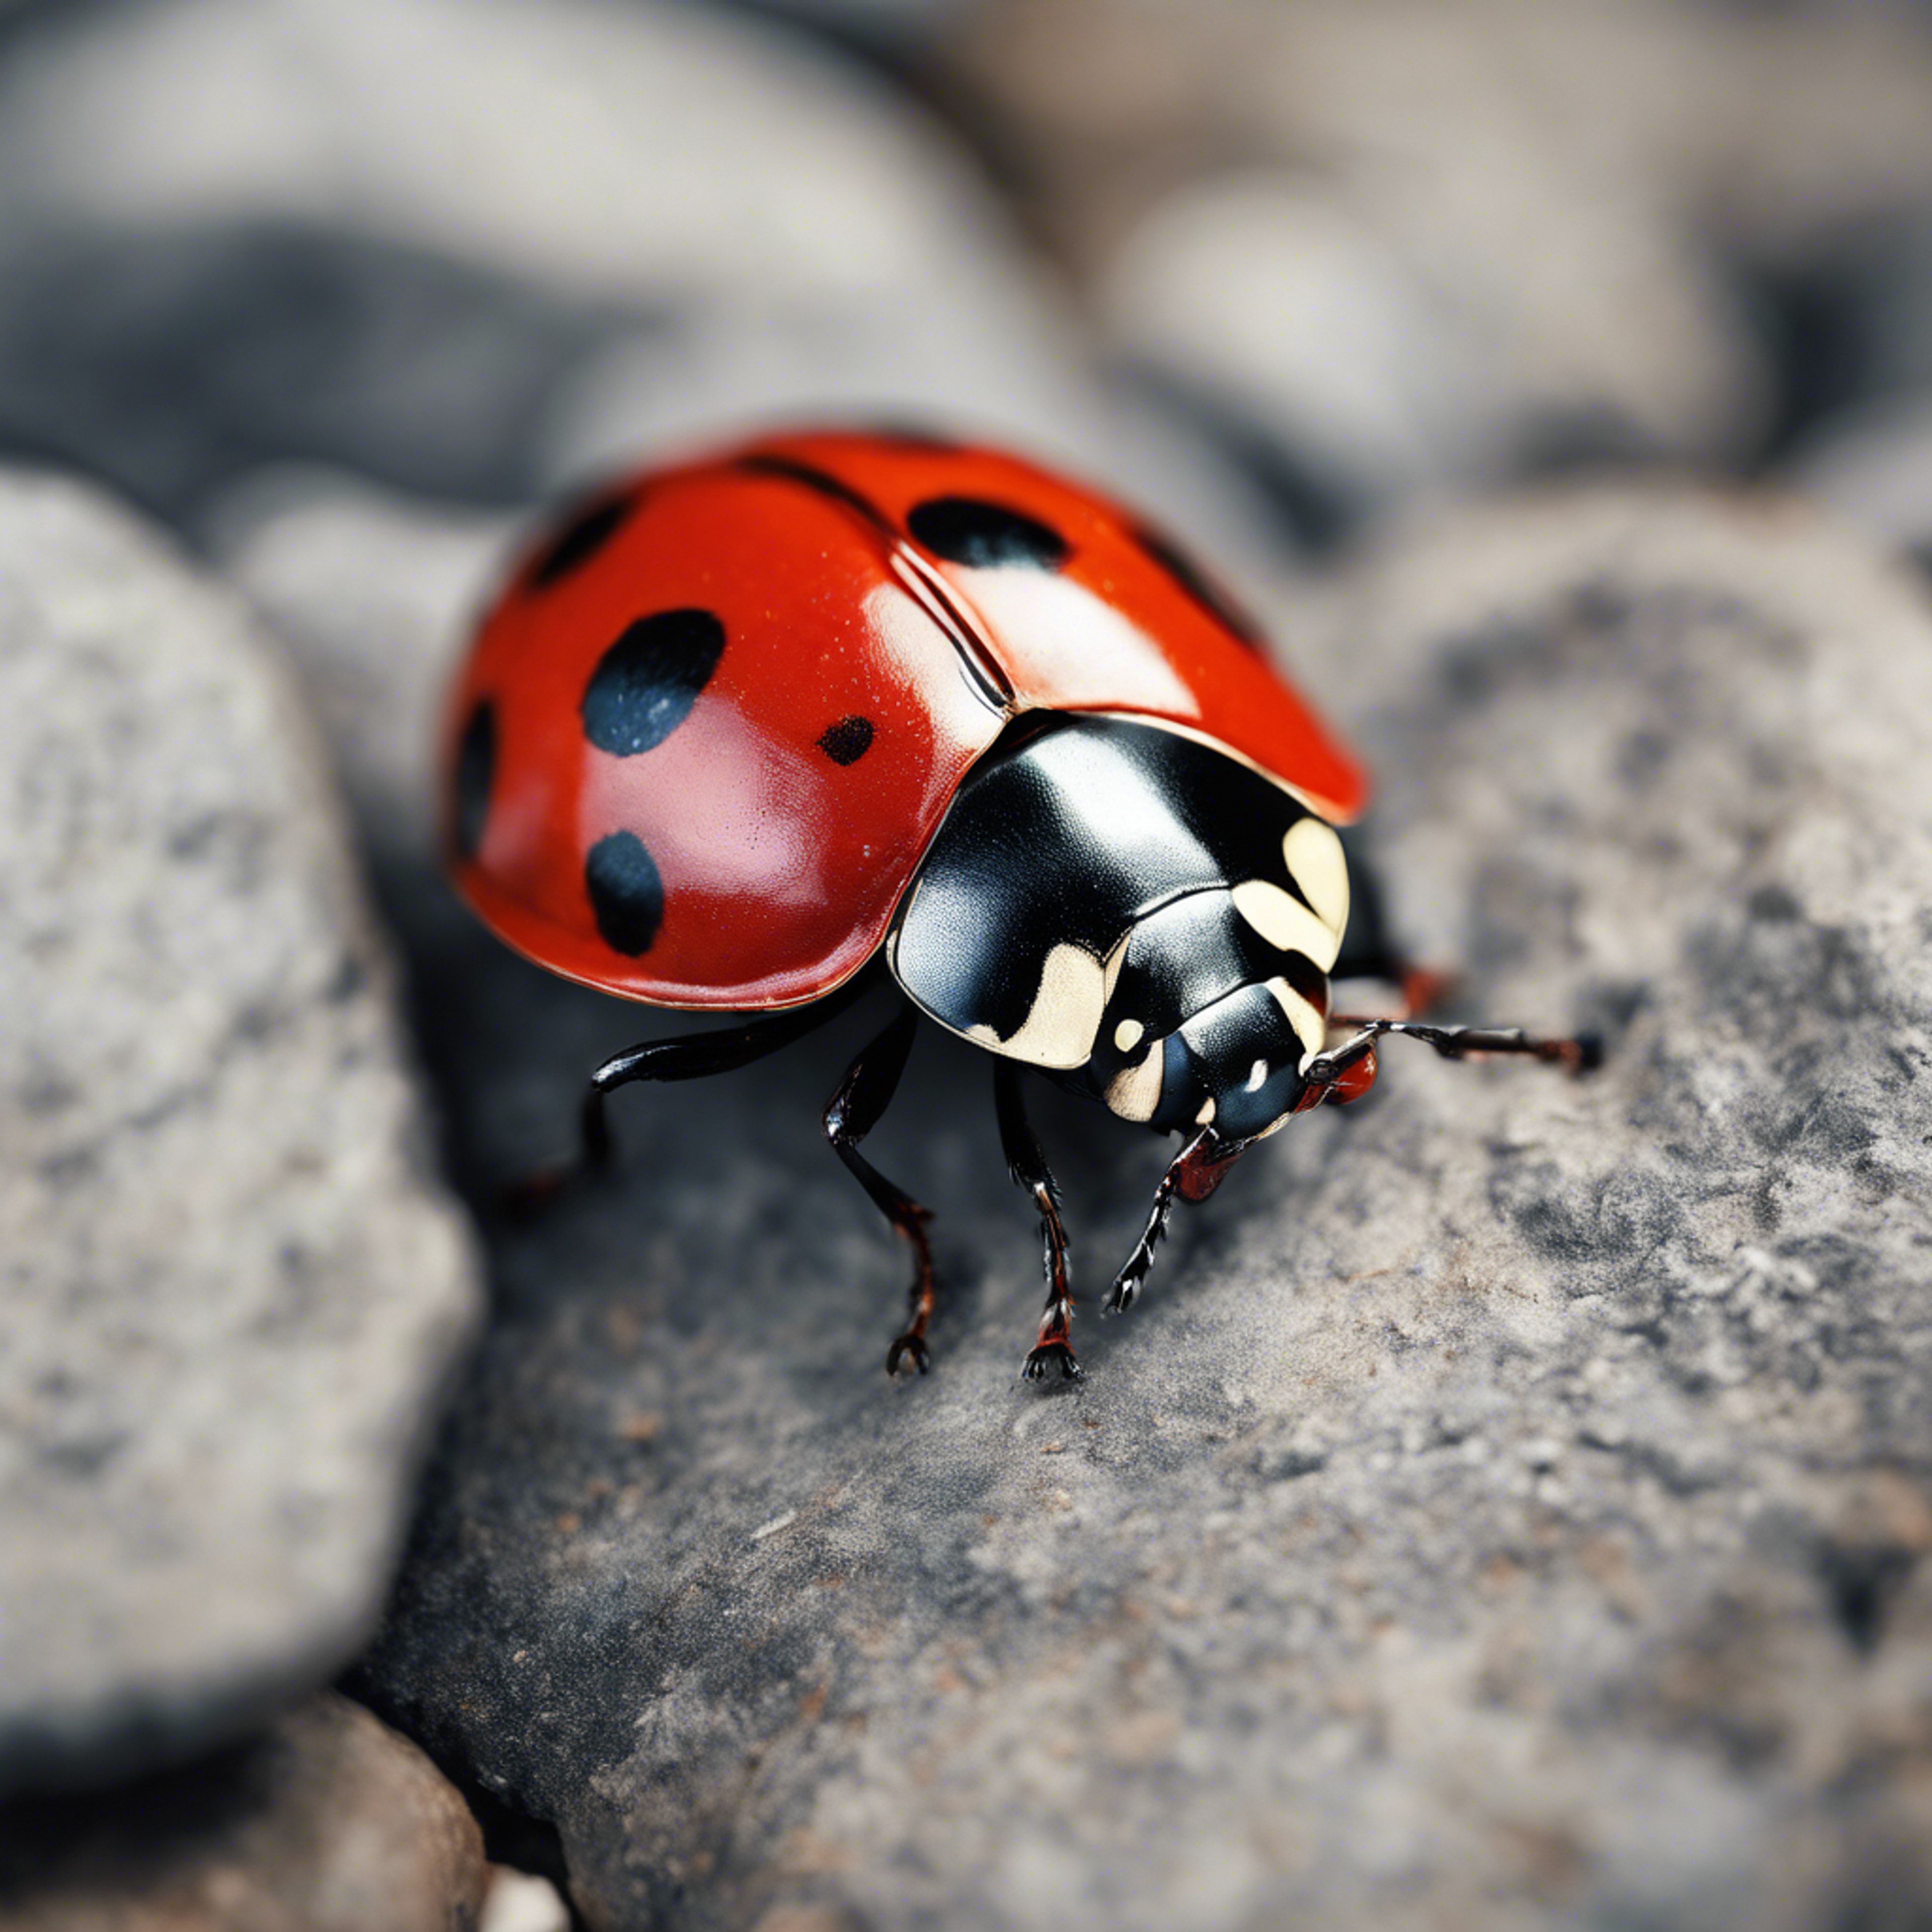 A fearless ladybug with bright red wings crawling over a dull, grey stone. Tapeta[cb02e673ce6f479eab40]